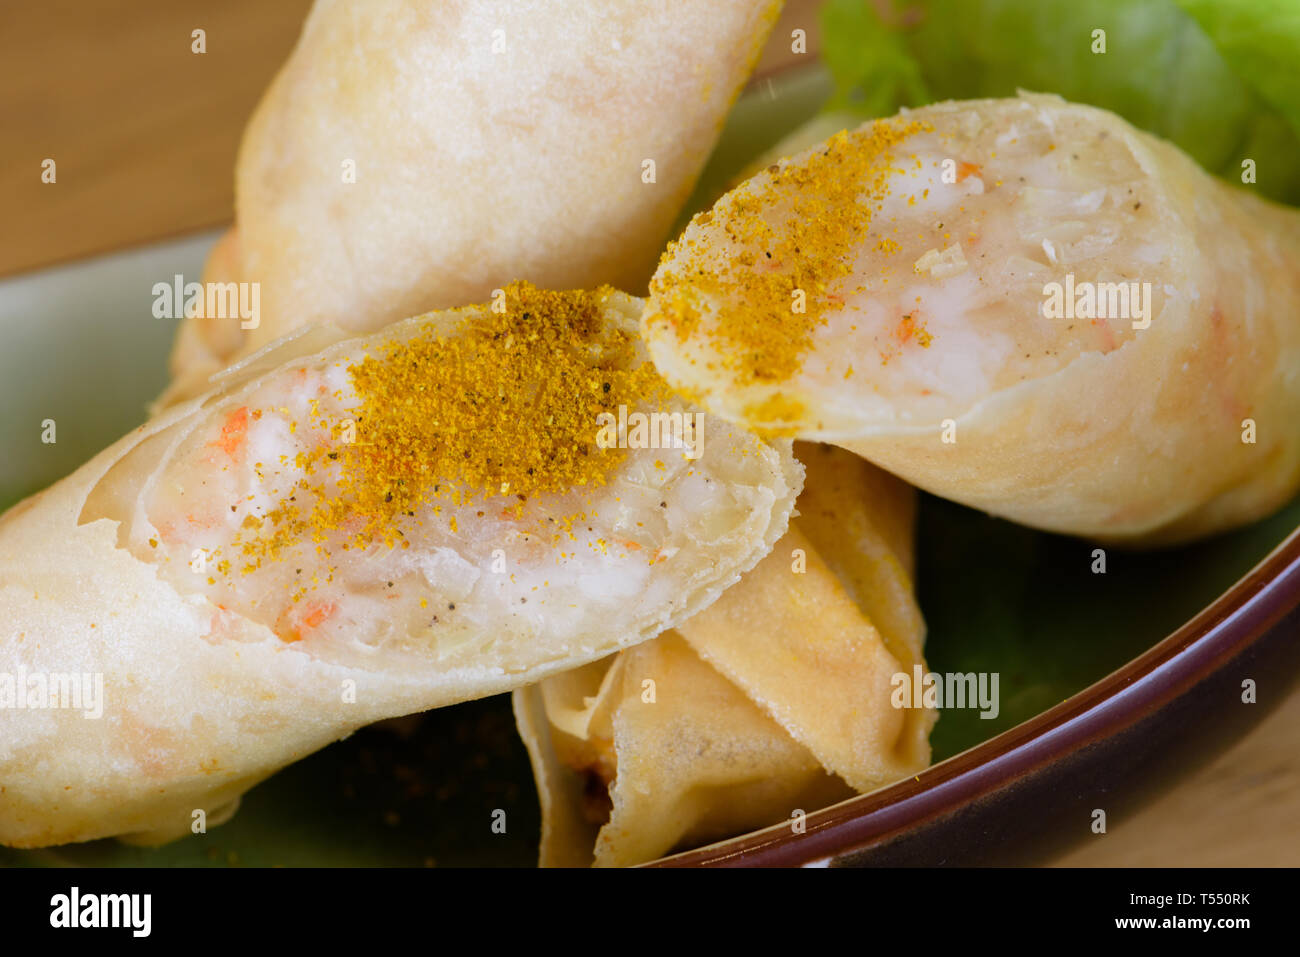 Harumaki, fried rolls in batter with shrimp pulp, flavoured with paprika, served with green salad on a boat-shaped plate, wooden table background - Im Stock Photo